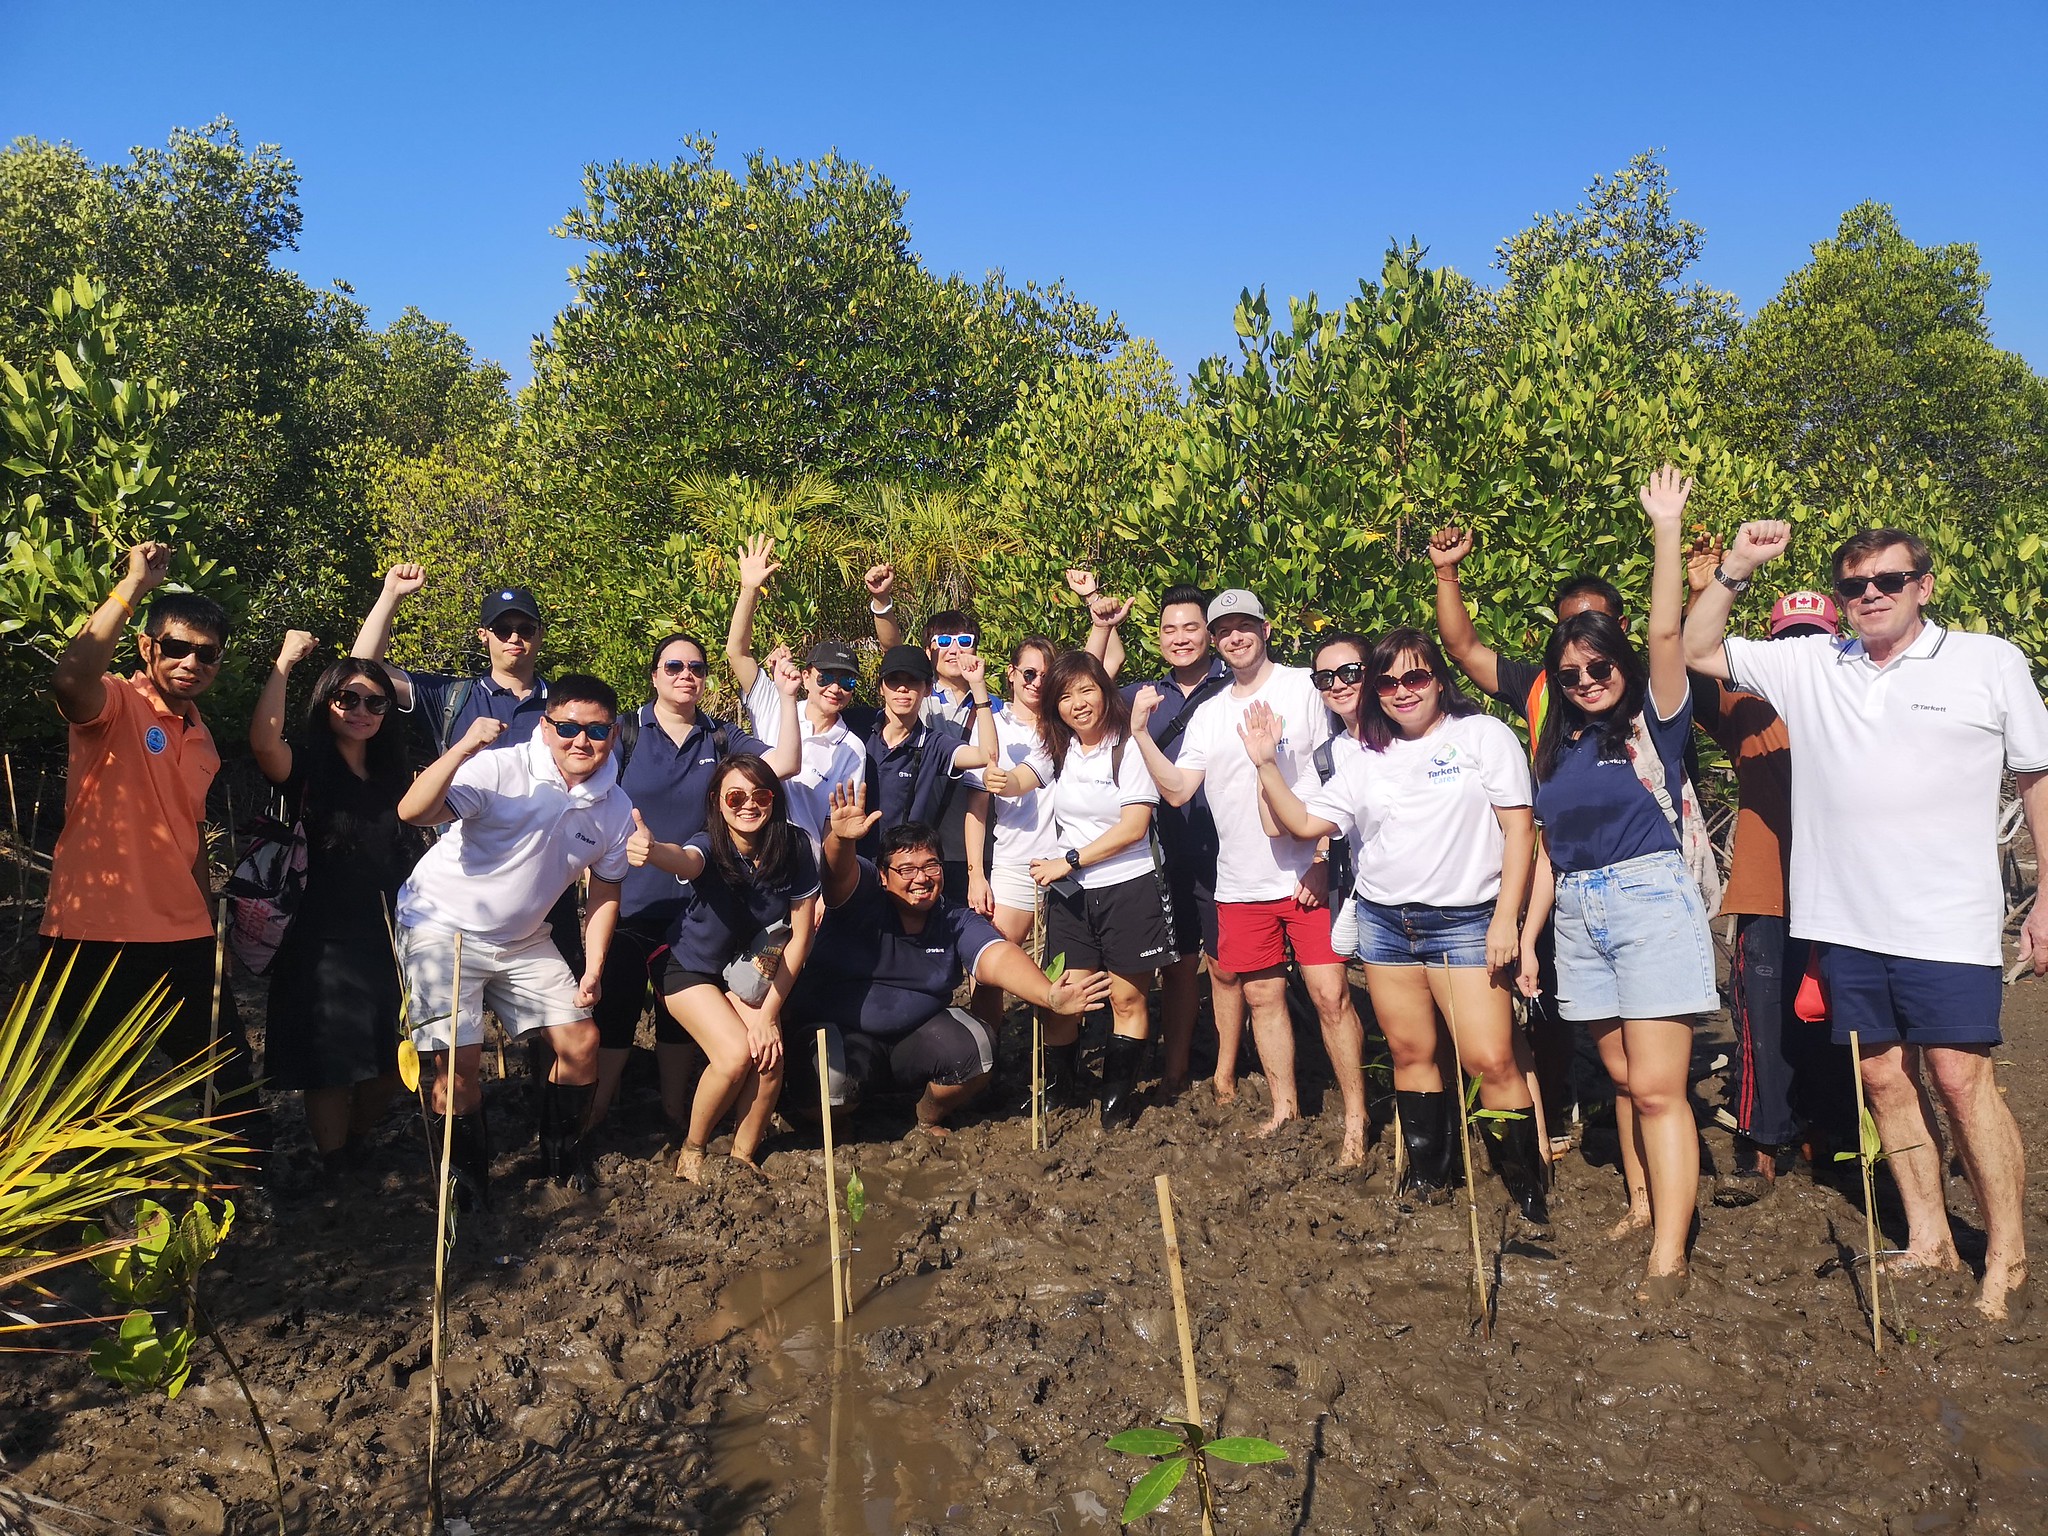 The Mangrove Planting Turtle Care event for Tarkett in Phuket was a purpose-driven corporate responsibility initiative aimed at environmental